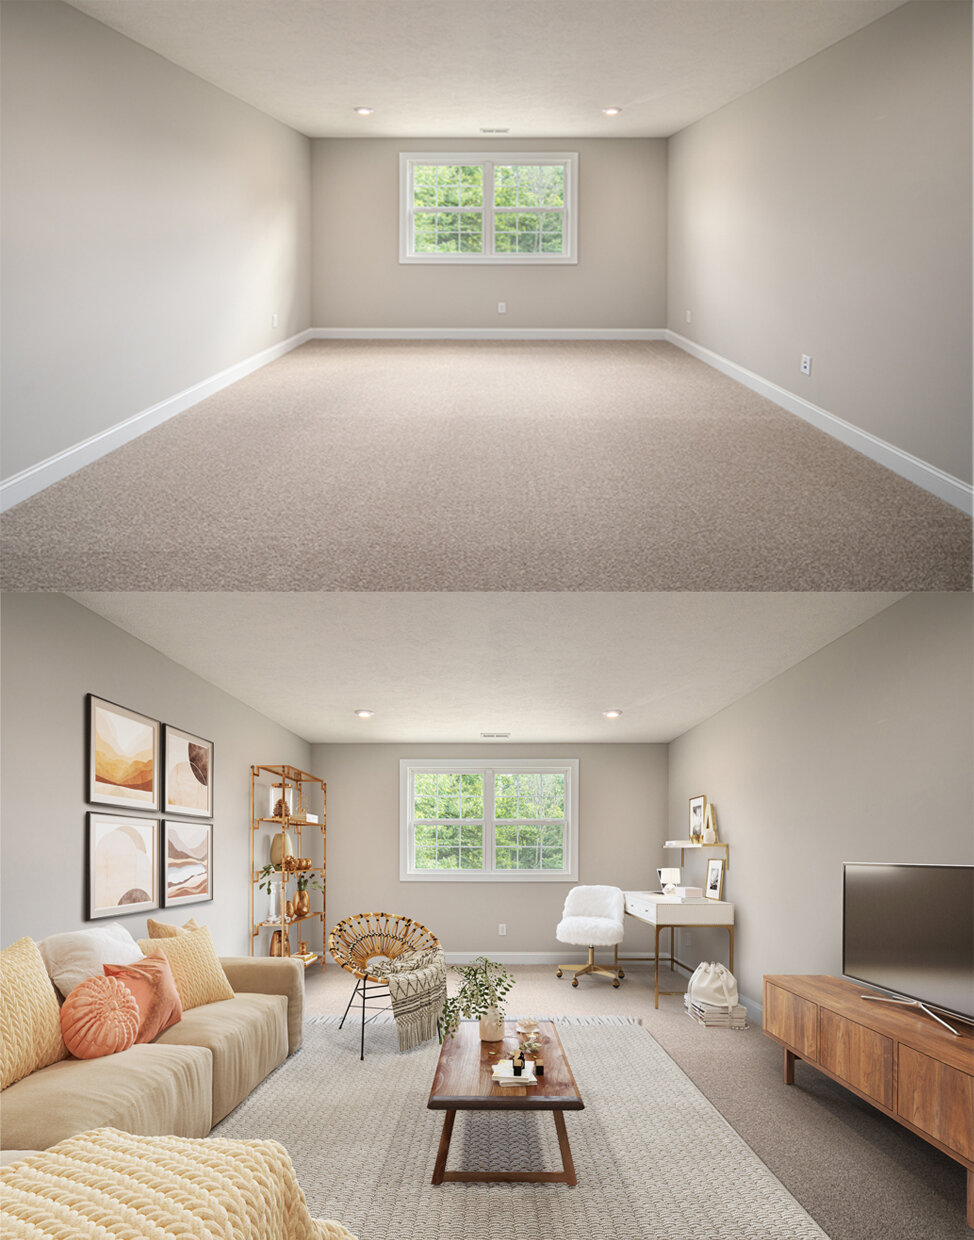 BEFORE AND AFTER VIRTUAL STAGING LIZA SUE PRODUCTIONS CLEVELAND AKRON